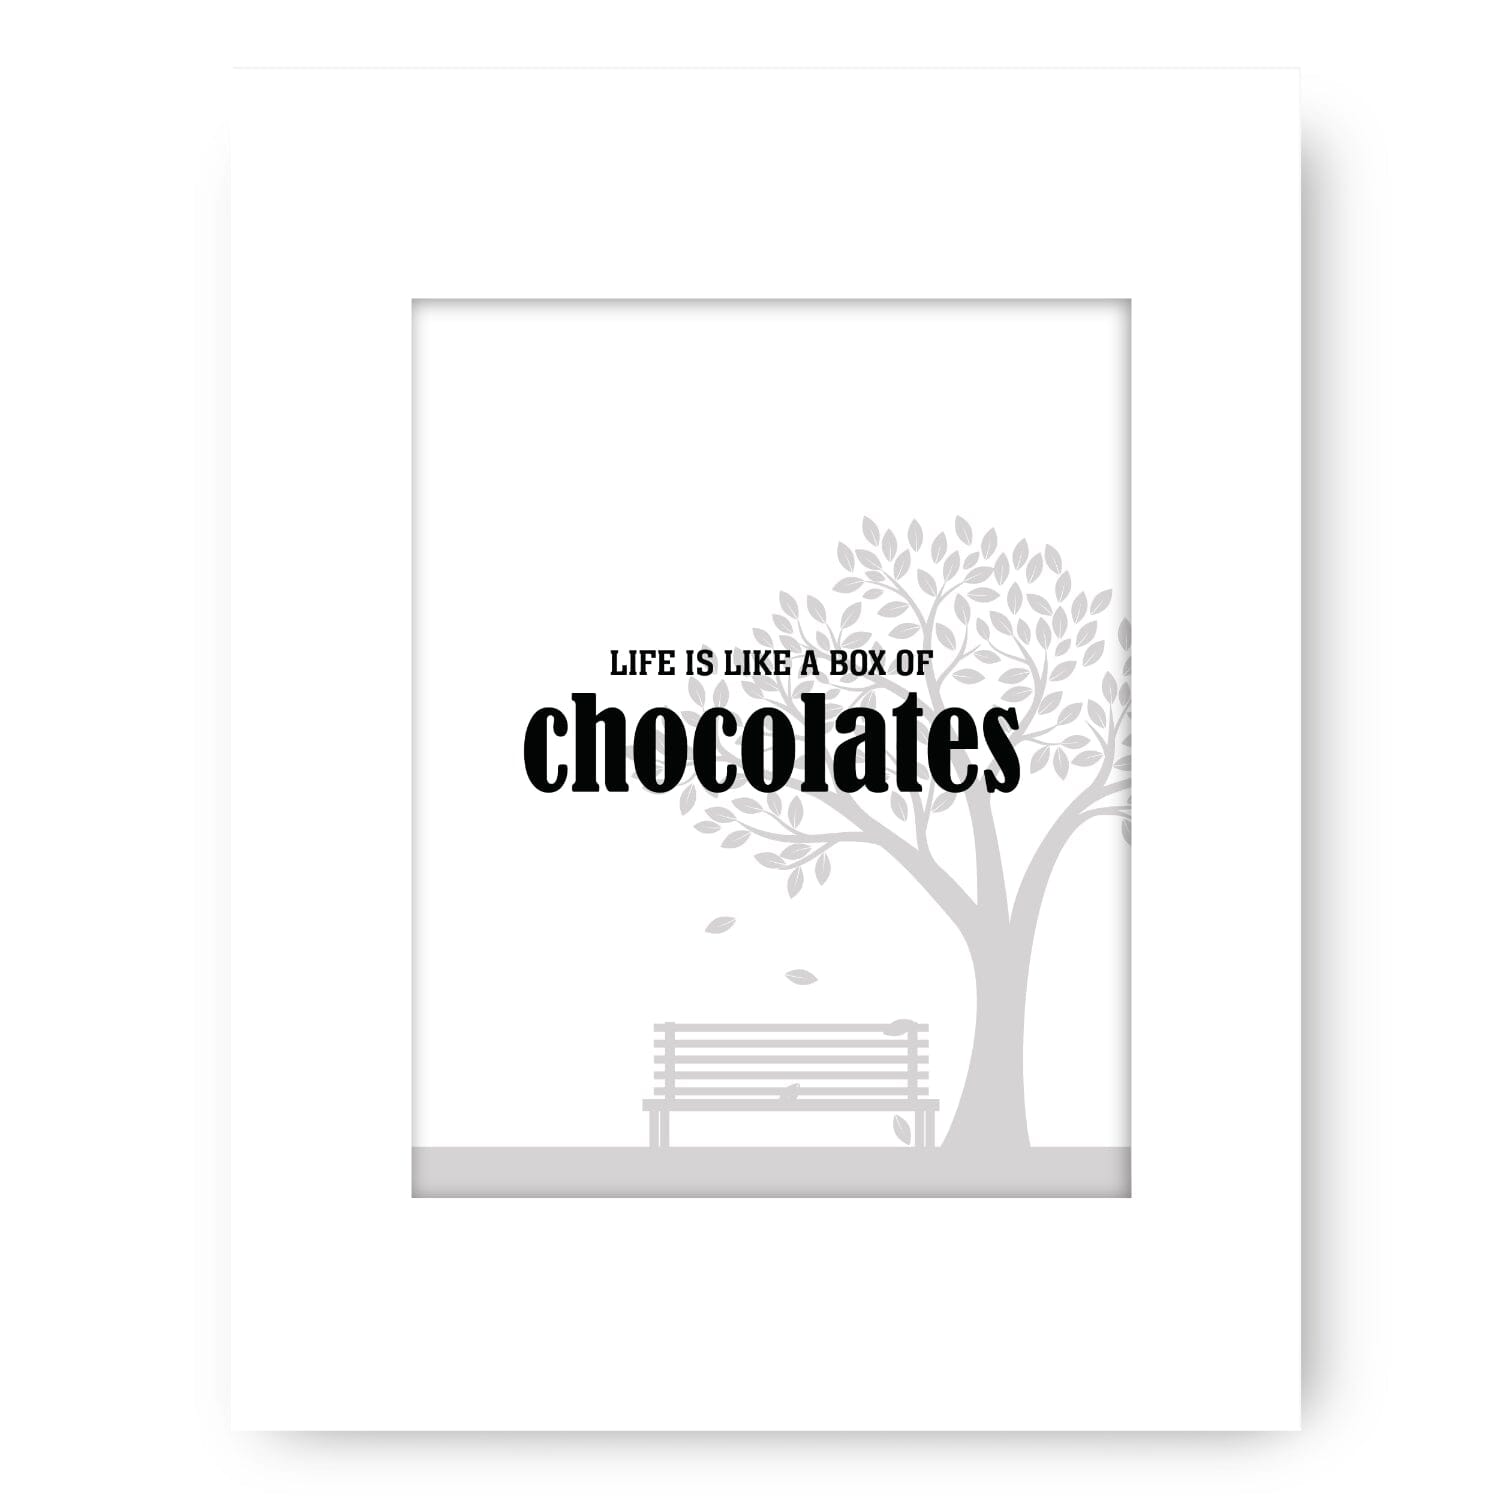 Life is Like a Box of Chocolates - Wise and Witty Quote Art Wise and Wiseass Quotes Song Lyrics Art 8x10 White Matted Print 